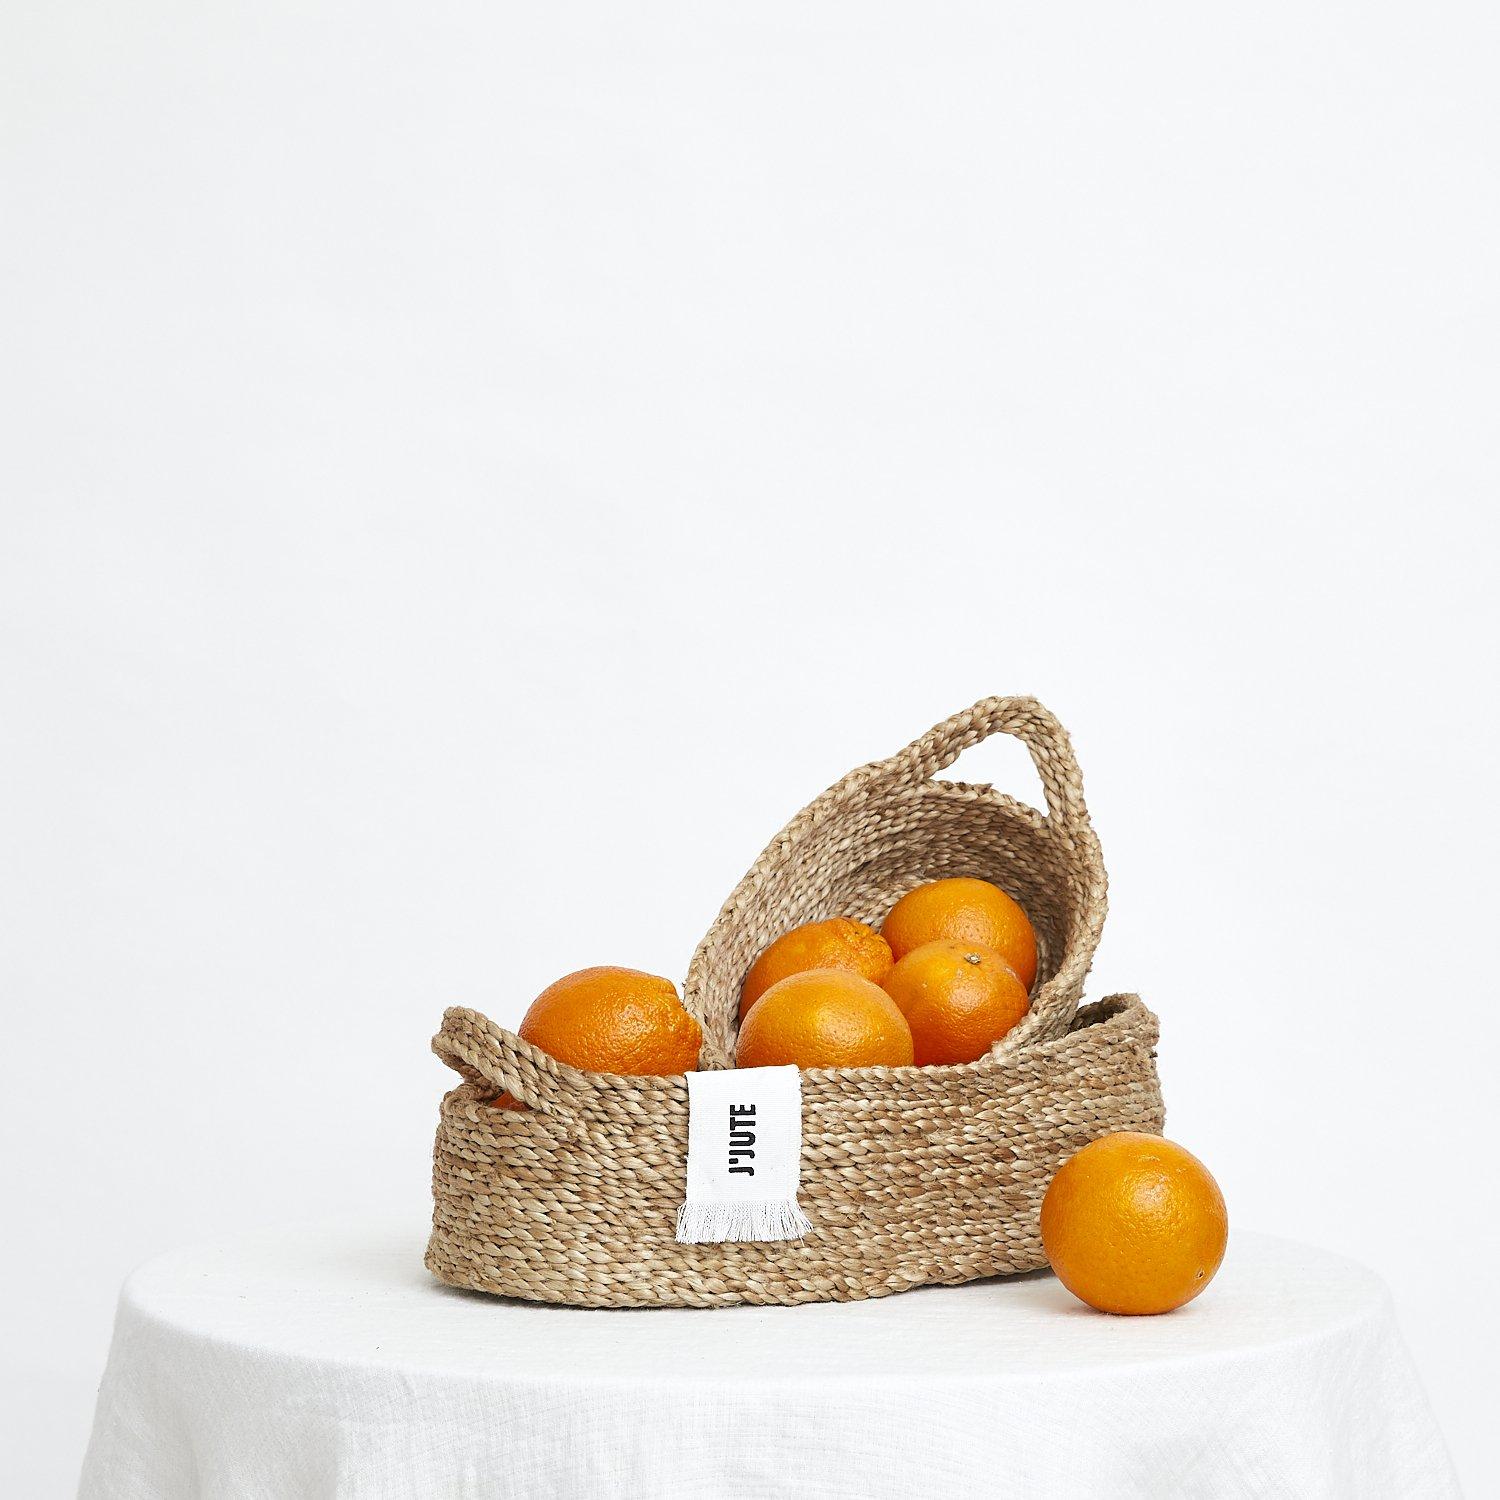 J'Jute Handmade Jute Tray Baskets, Natural In New Condition For Sale In Bondi, NSW